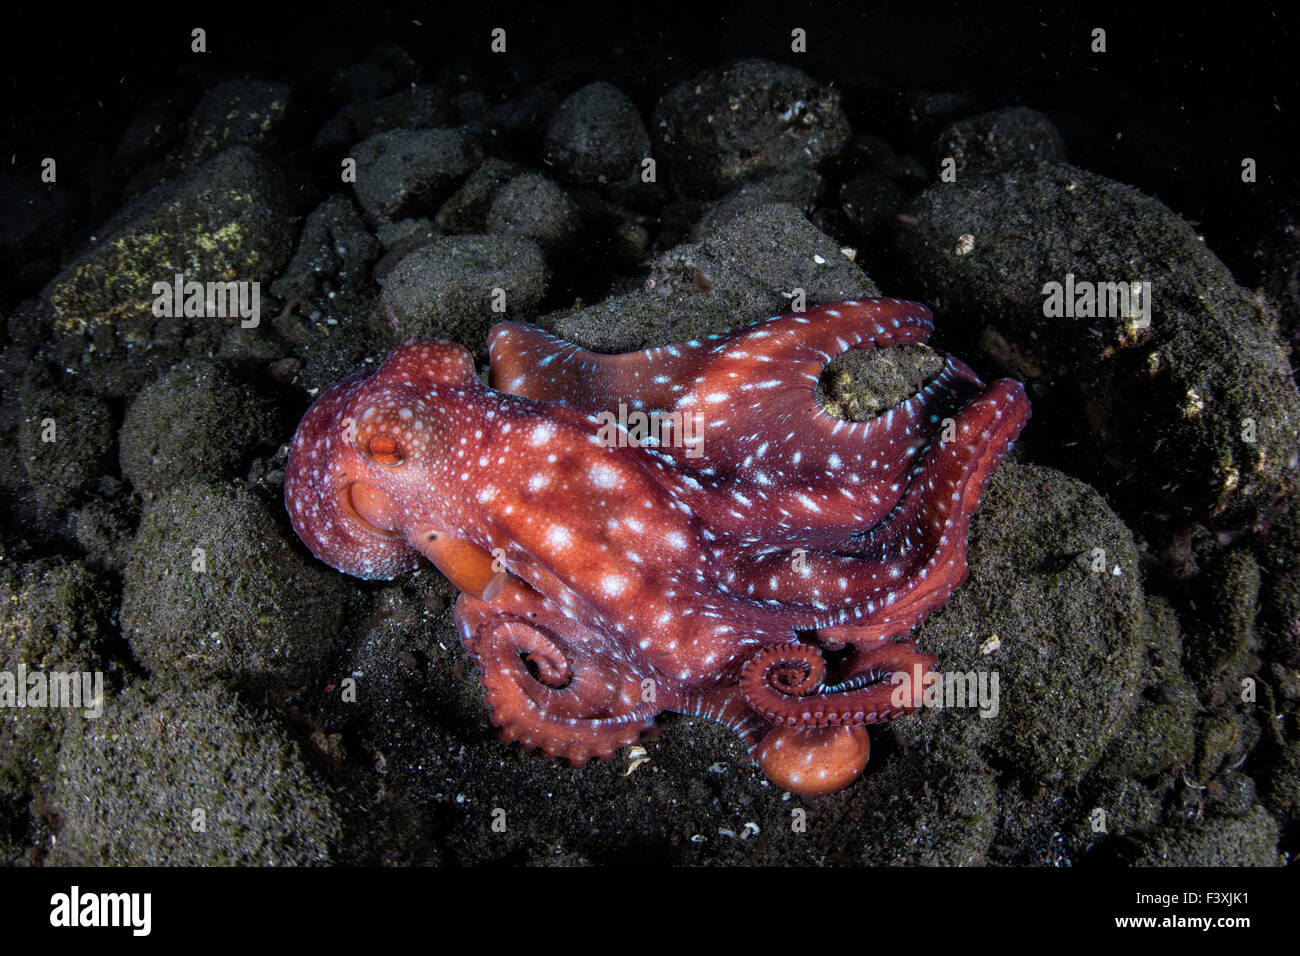 A nocturnal Starry Night octopus (Octopus luteus) hunts for prey at night on a rocky reef in Komodo National Park, Indonesia. Stock Photo